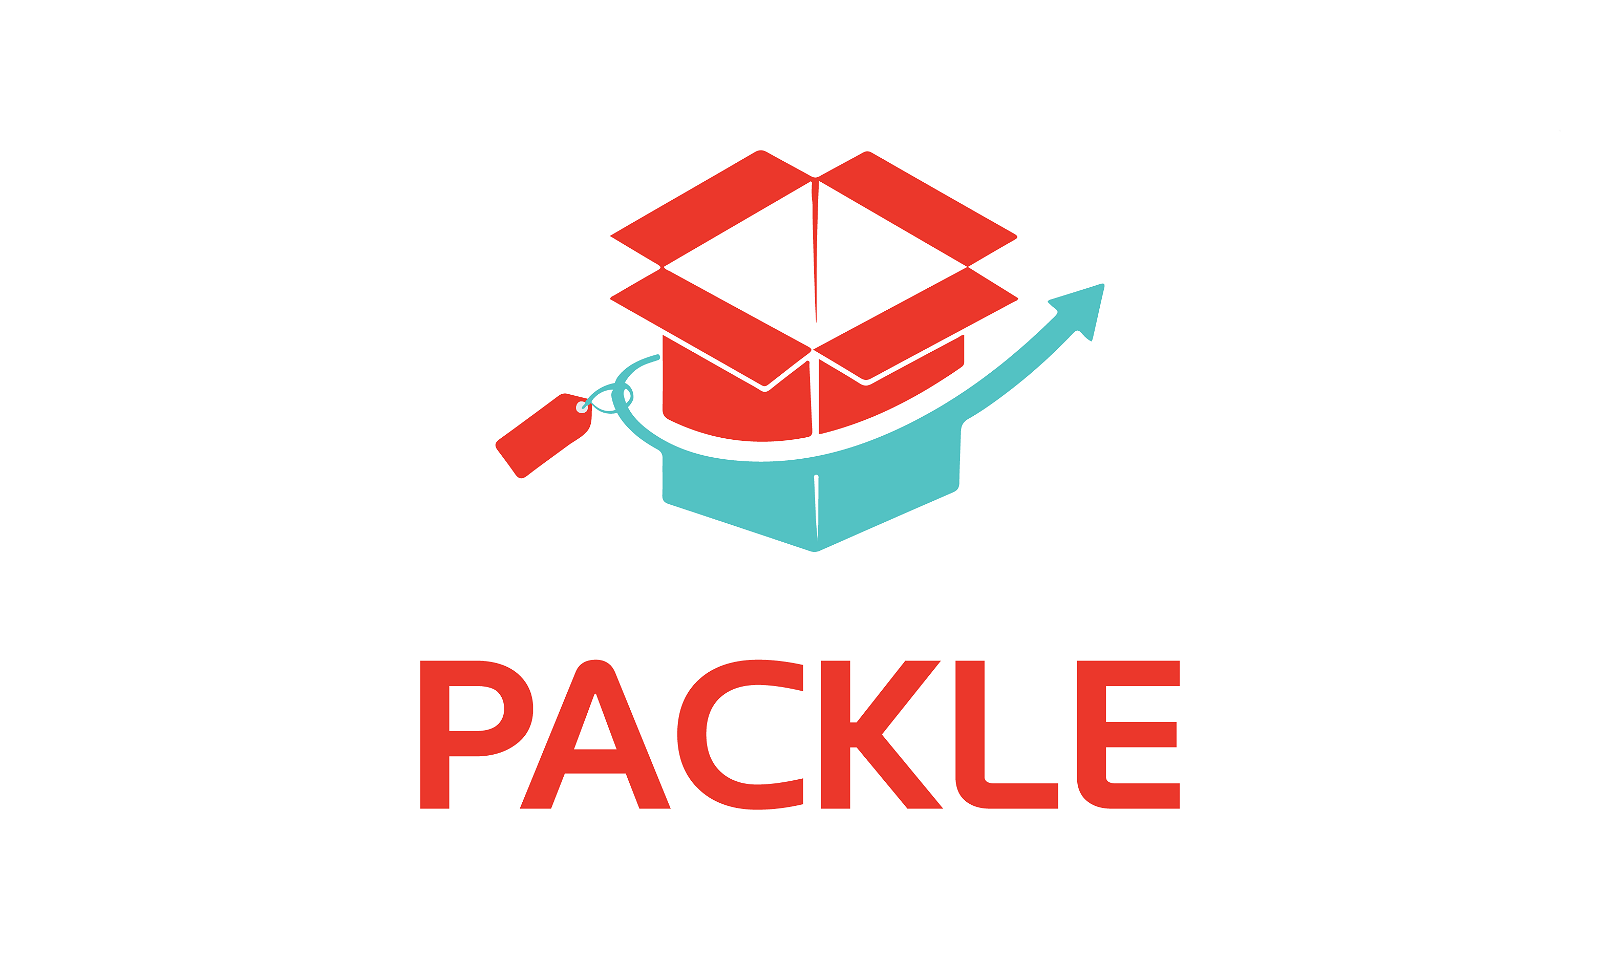 Packle.com - Creative brandable domain for sale